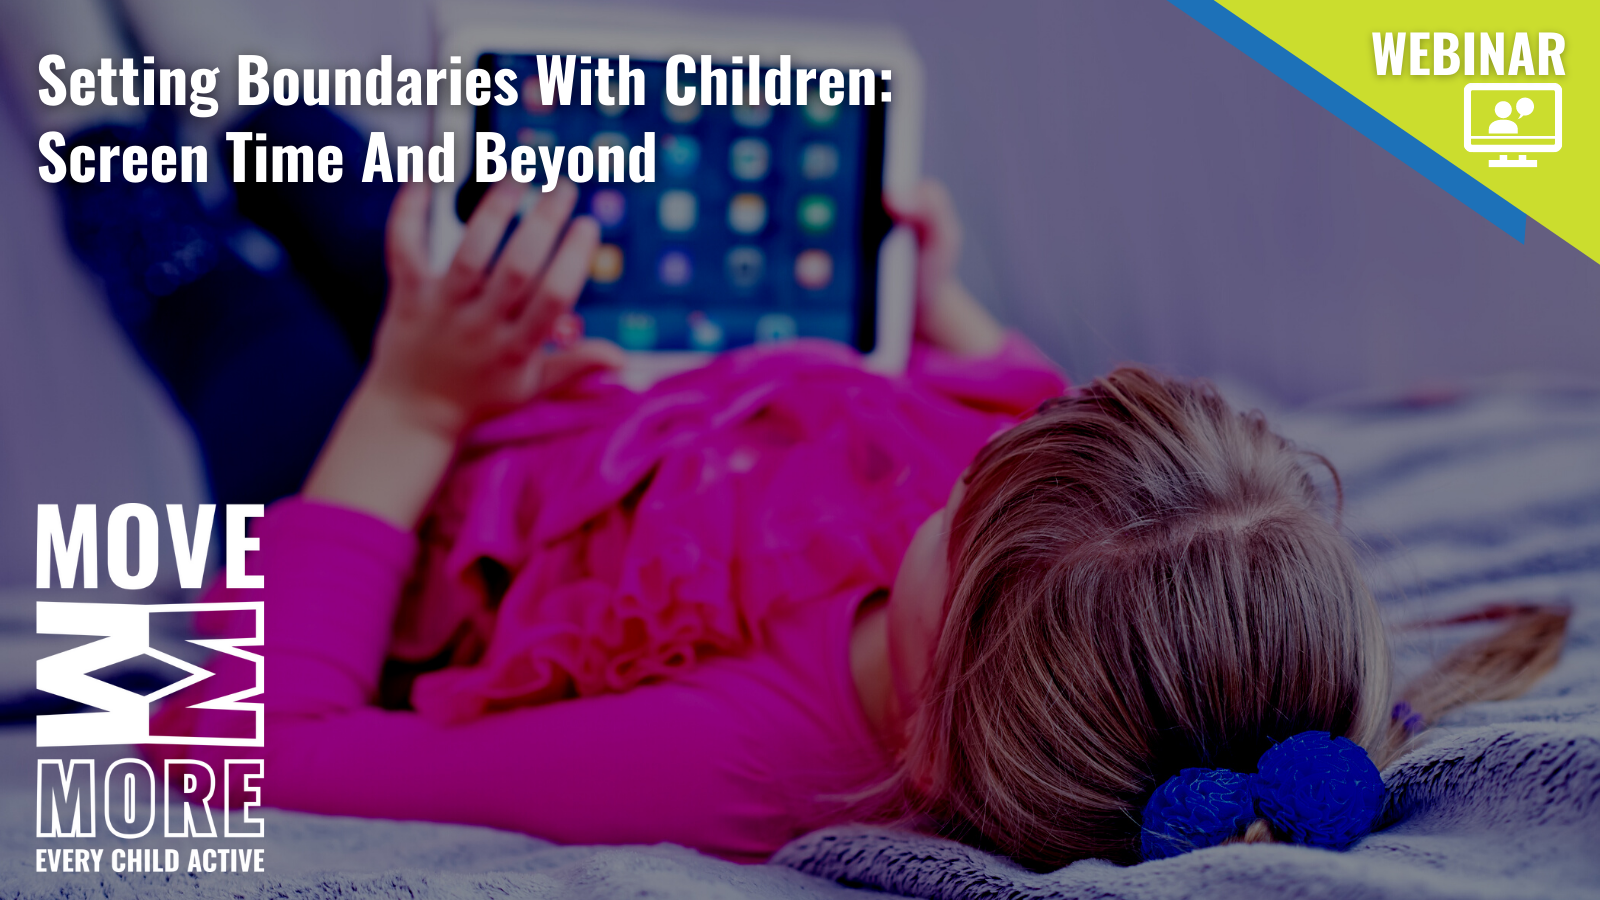 Setting boundaries with children: screen time and beyond